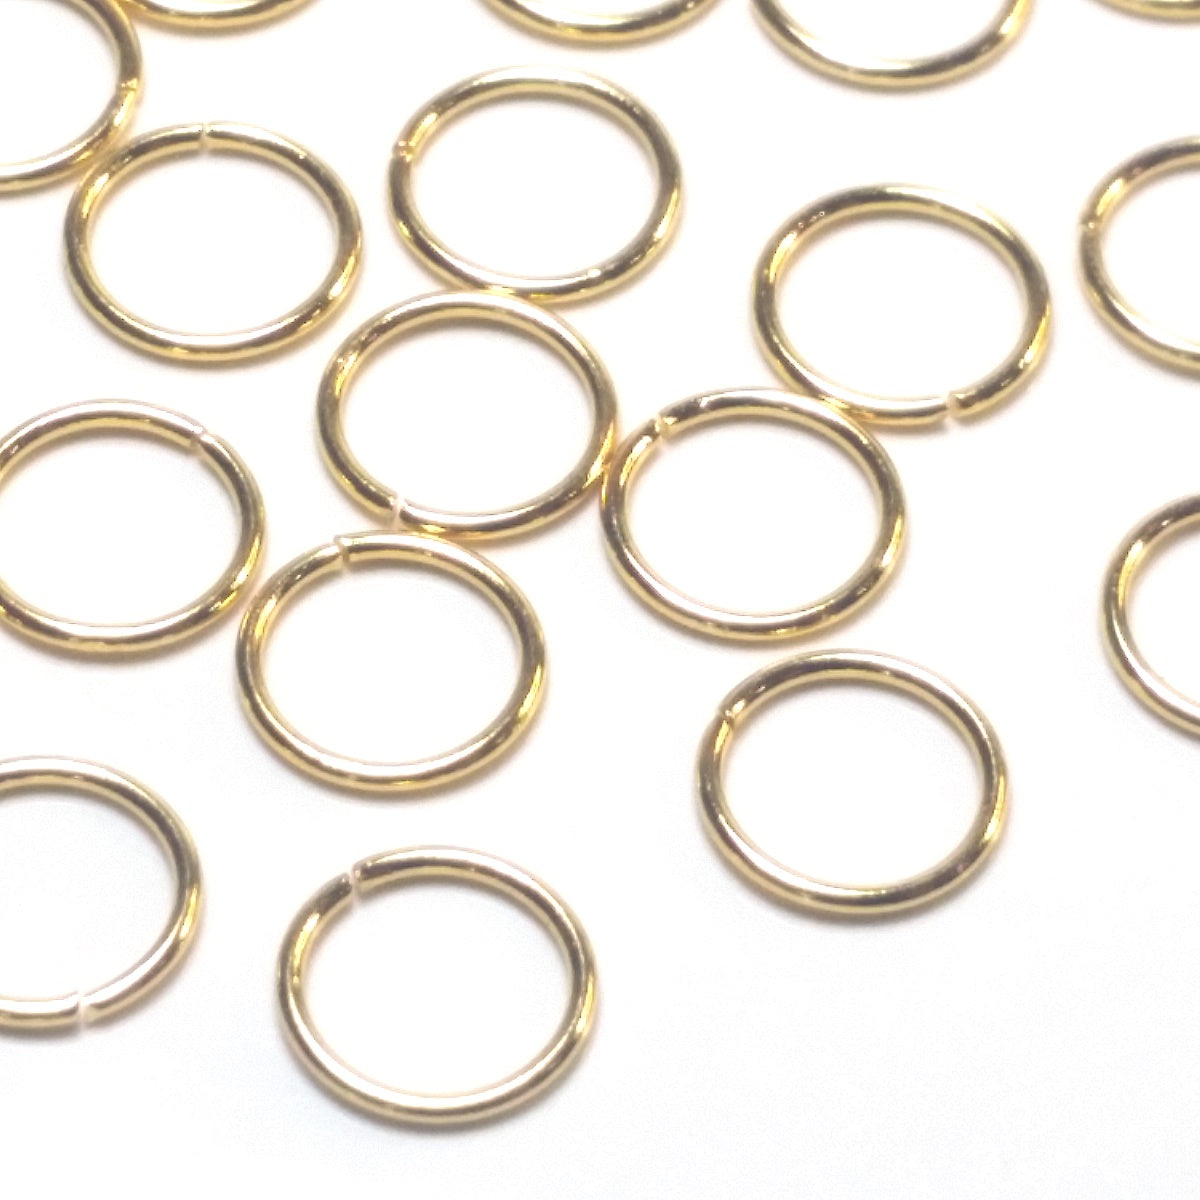 Gold Filled Jump Rings 20 Gauge Jump Rings - Sold by 1/4 Ounce